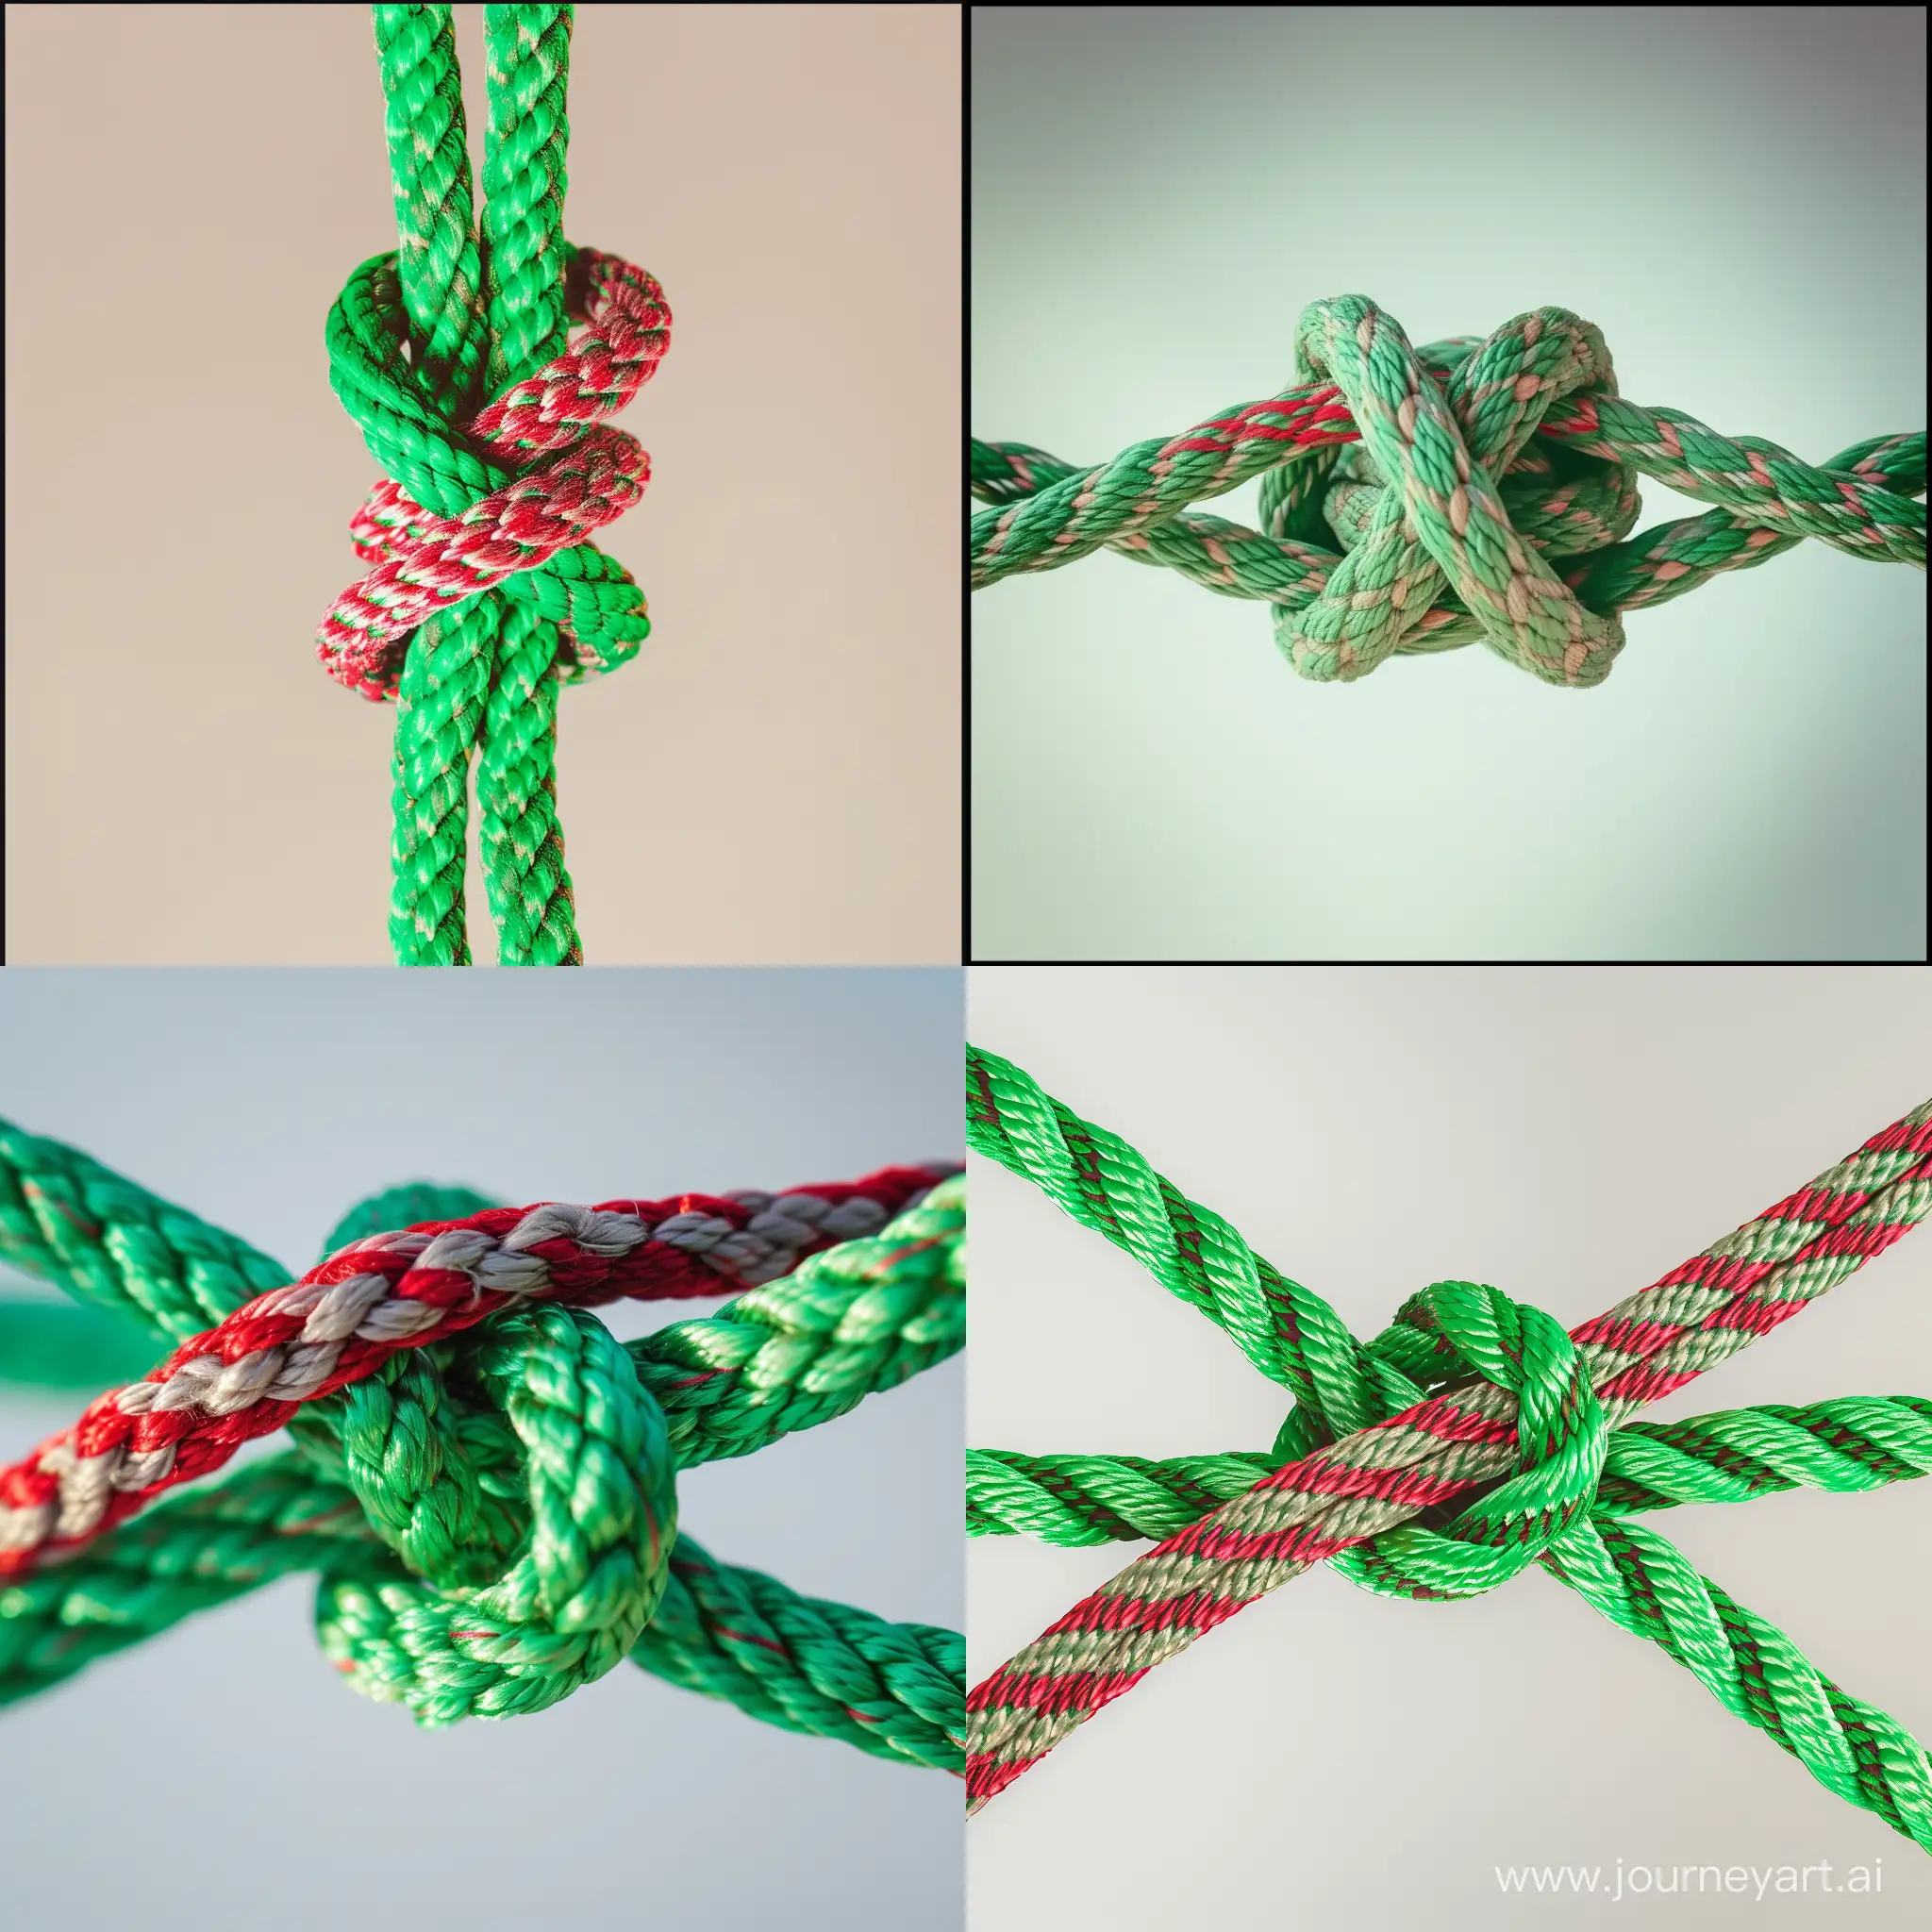 Vibrant-Green-and-Red-Ropes-Tied-in-a-Captivating-Knot-on-a-Light-Background